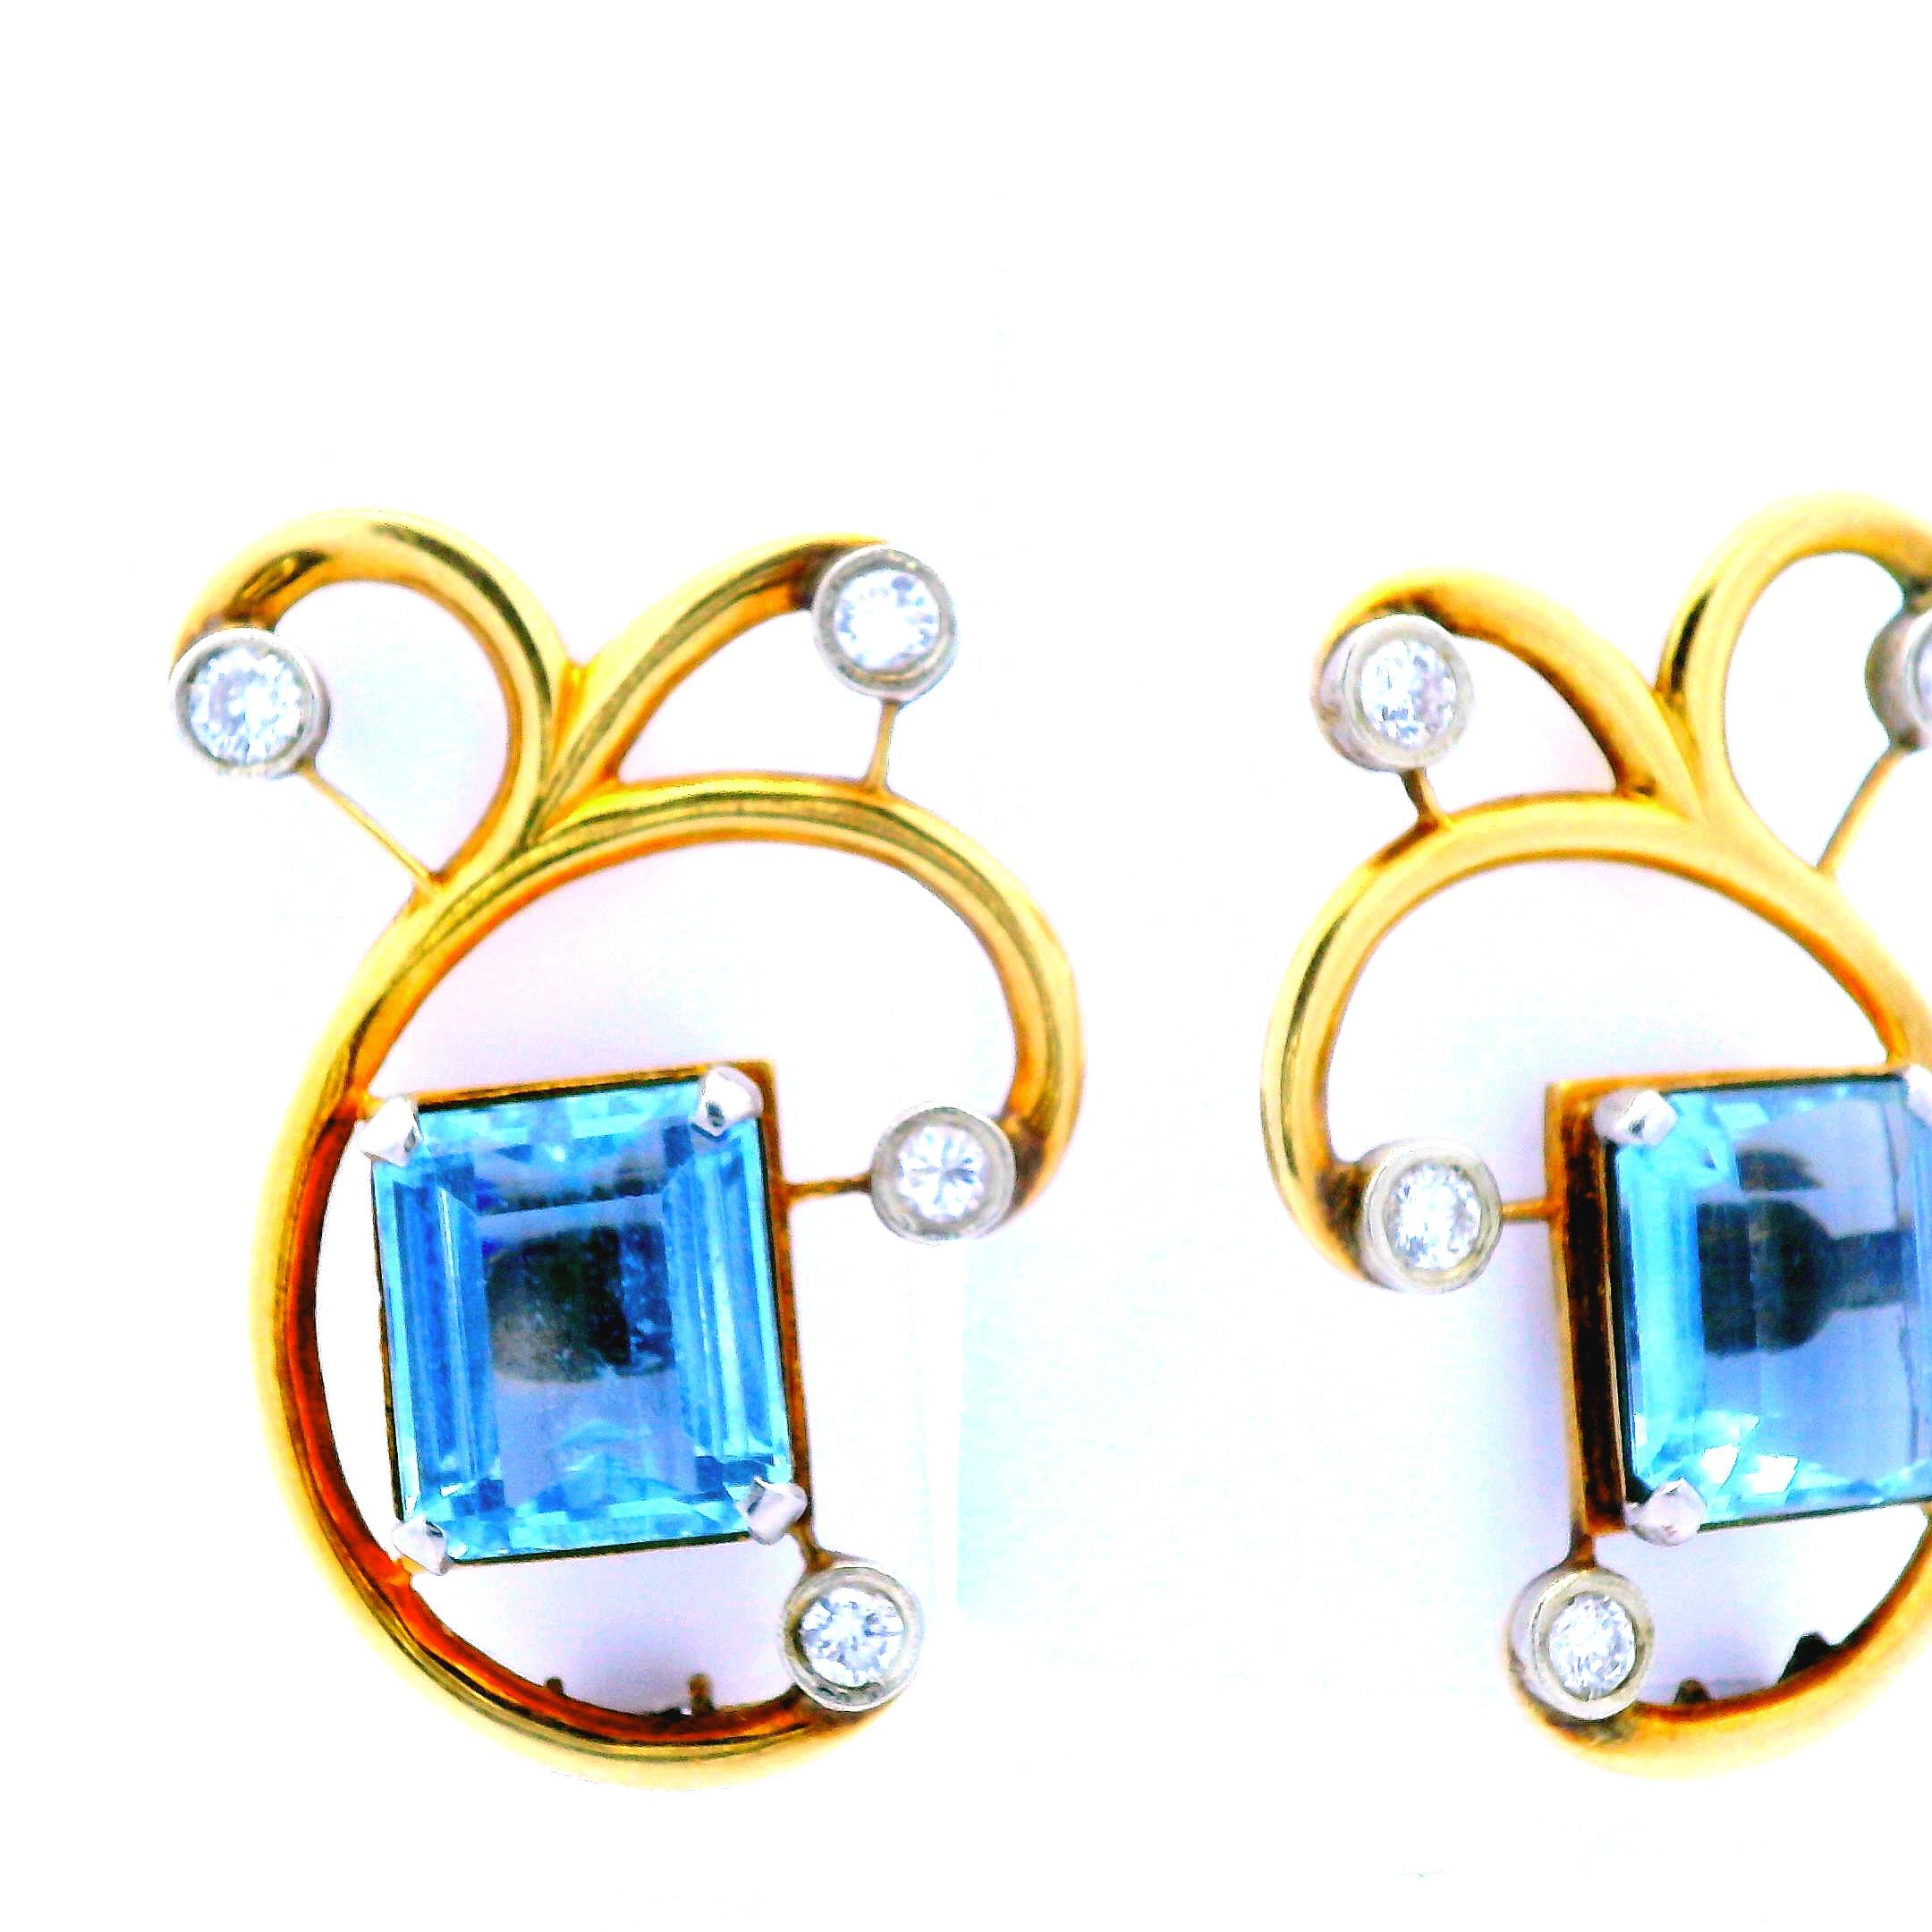 These beautiful earrings from the 1950s are made from 14k rose gold with aquamarine and diamond. The unique design of these earrings allow for them to be worn on either ear, allowing for more style options while wearing. They also feature a clip on